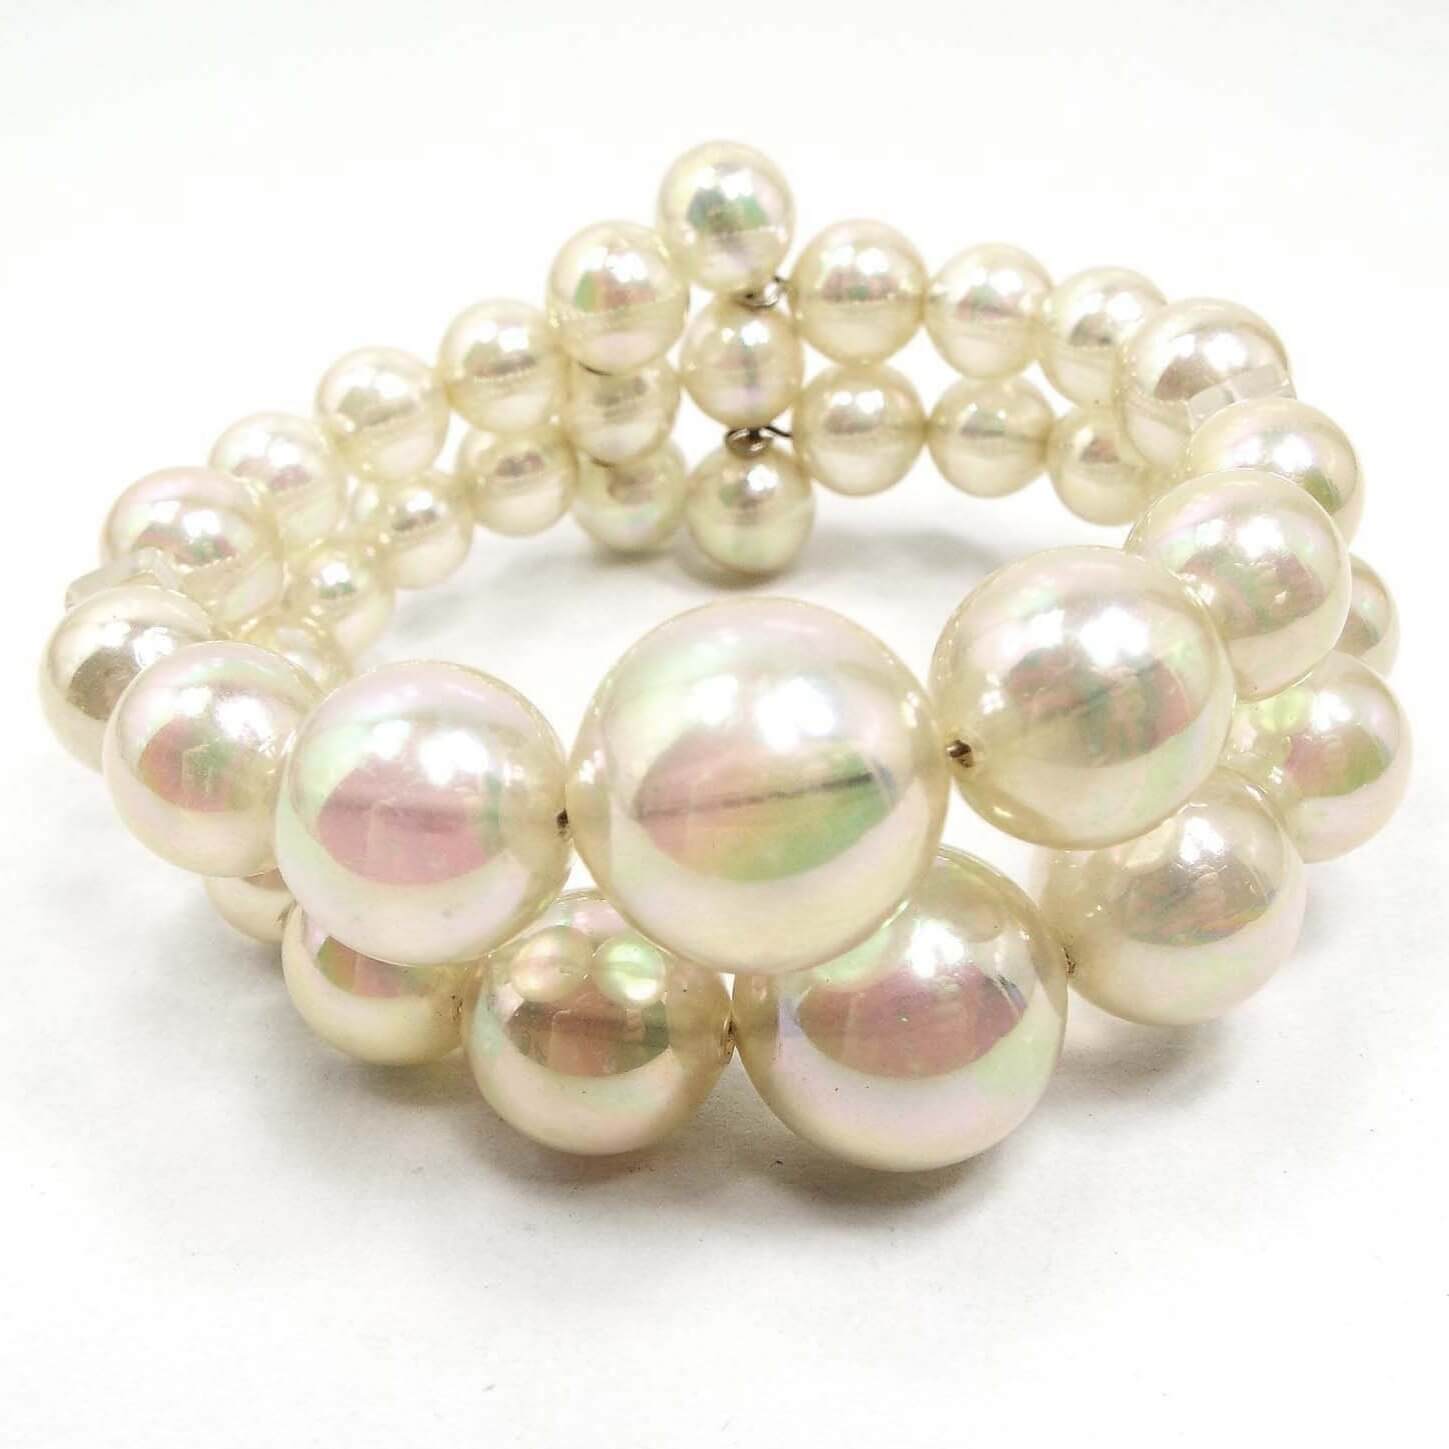 Front view of the Mid Century vintage AB plastic beaded memory wire bracelet. It has pearly aurora borealis semi translucent white round beads in two rows around the bracelet. The memory wire can be seen inside and between the beads.